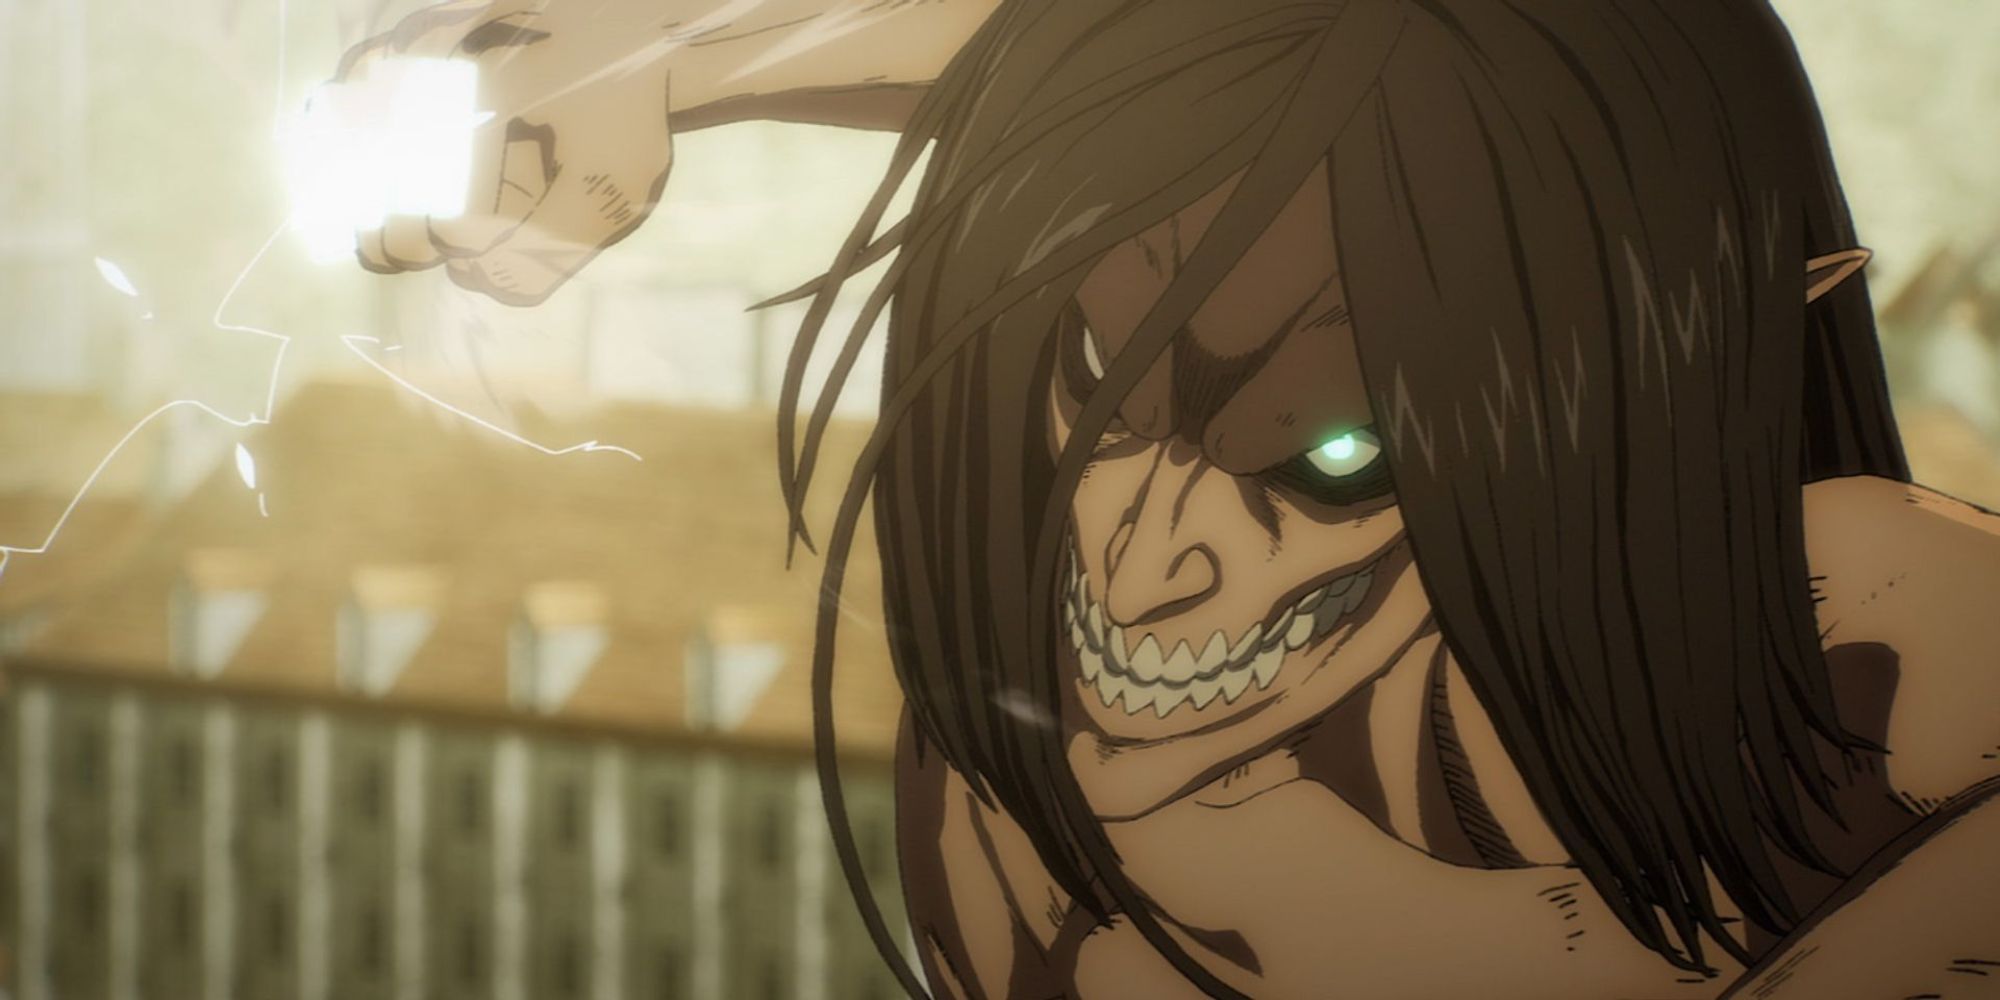 Attack on Titan Has Been Removed From Netflix US. Will it Return